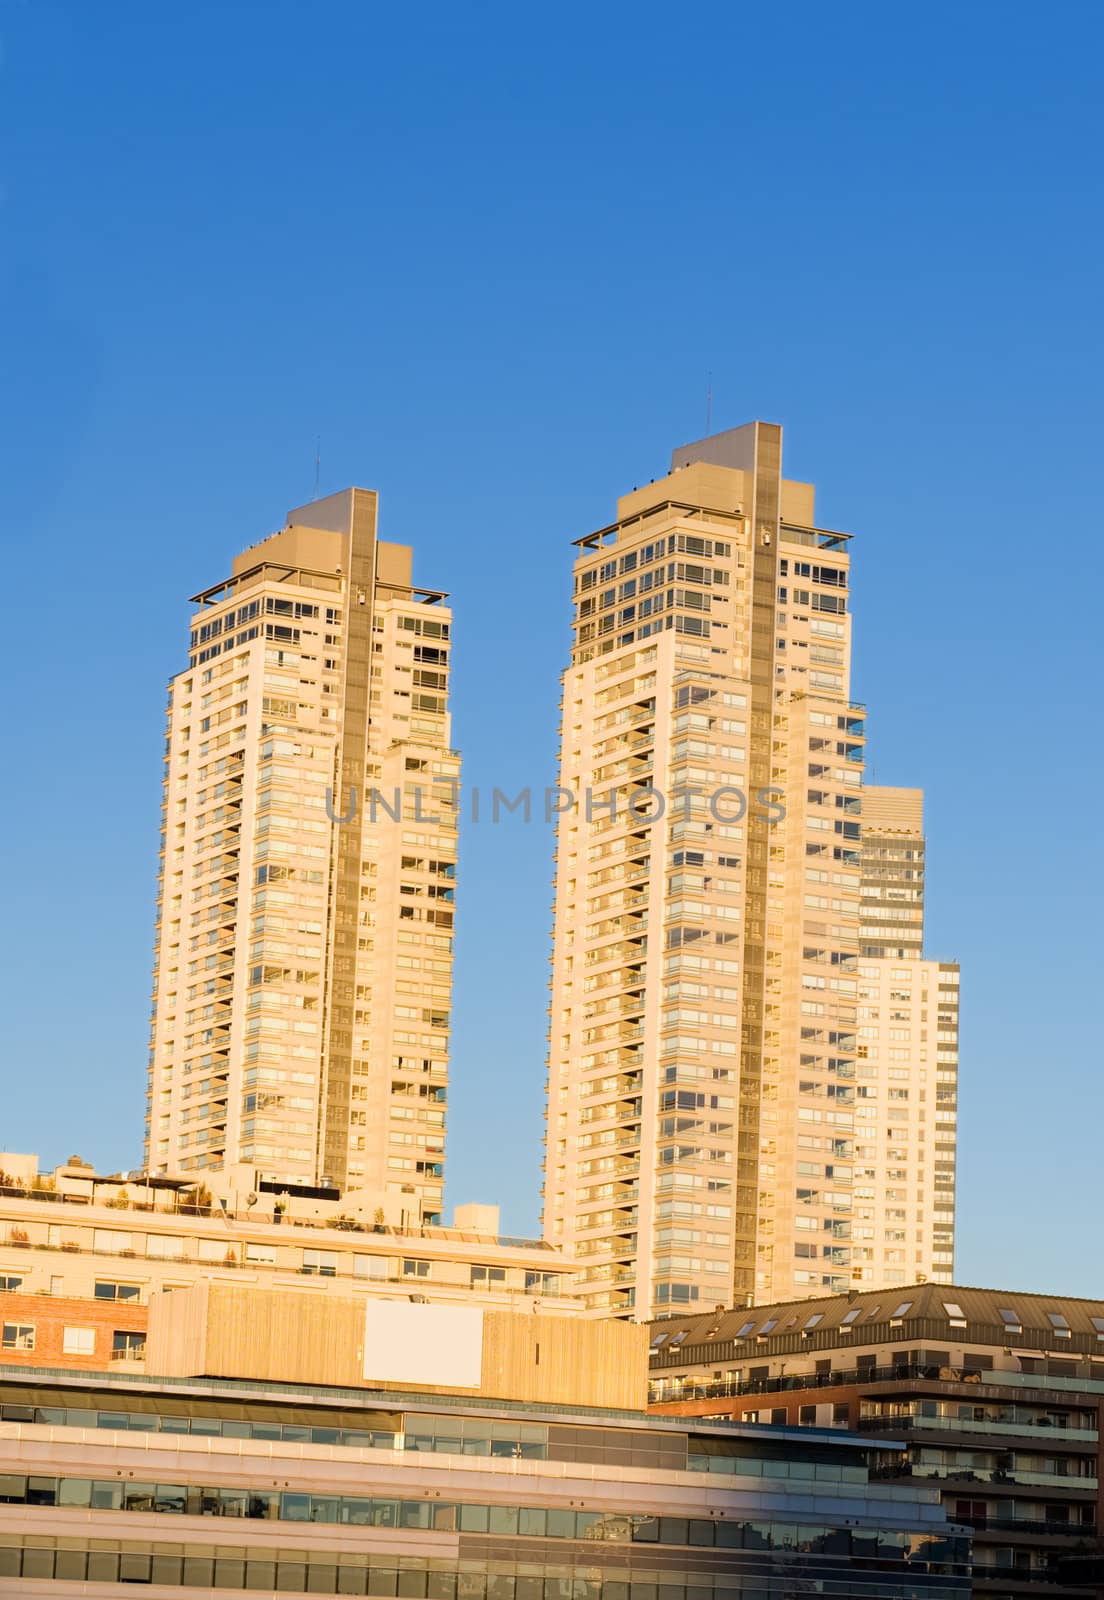 Modern buildings in Puerto Madero, Buenos Aires, Argentina.